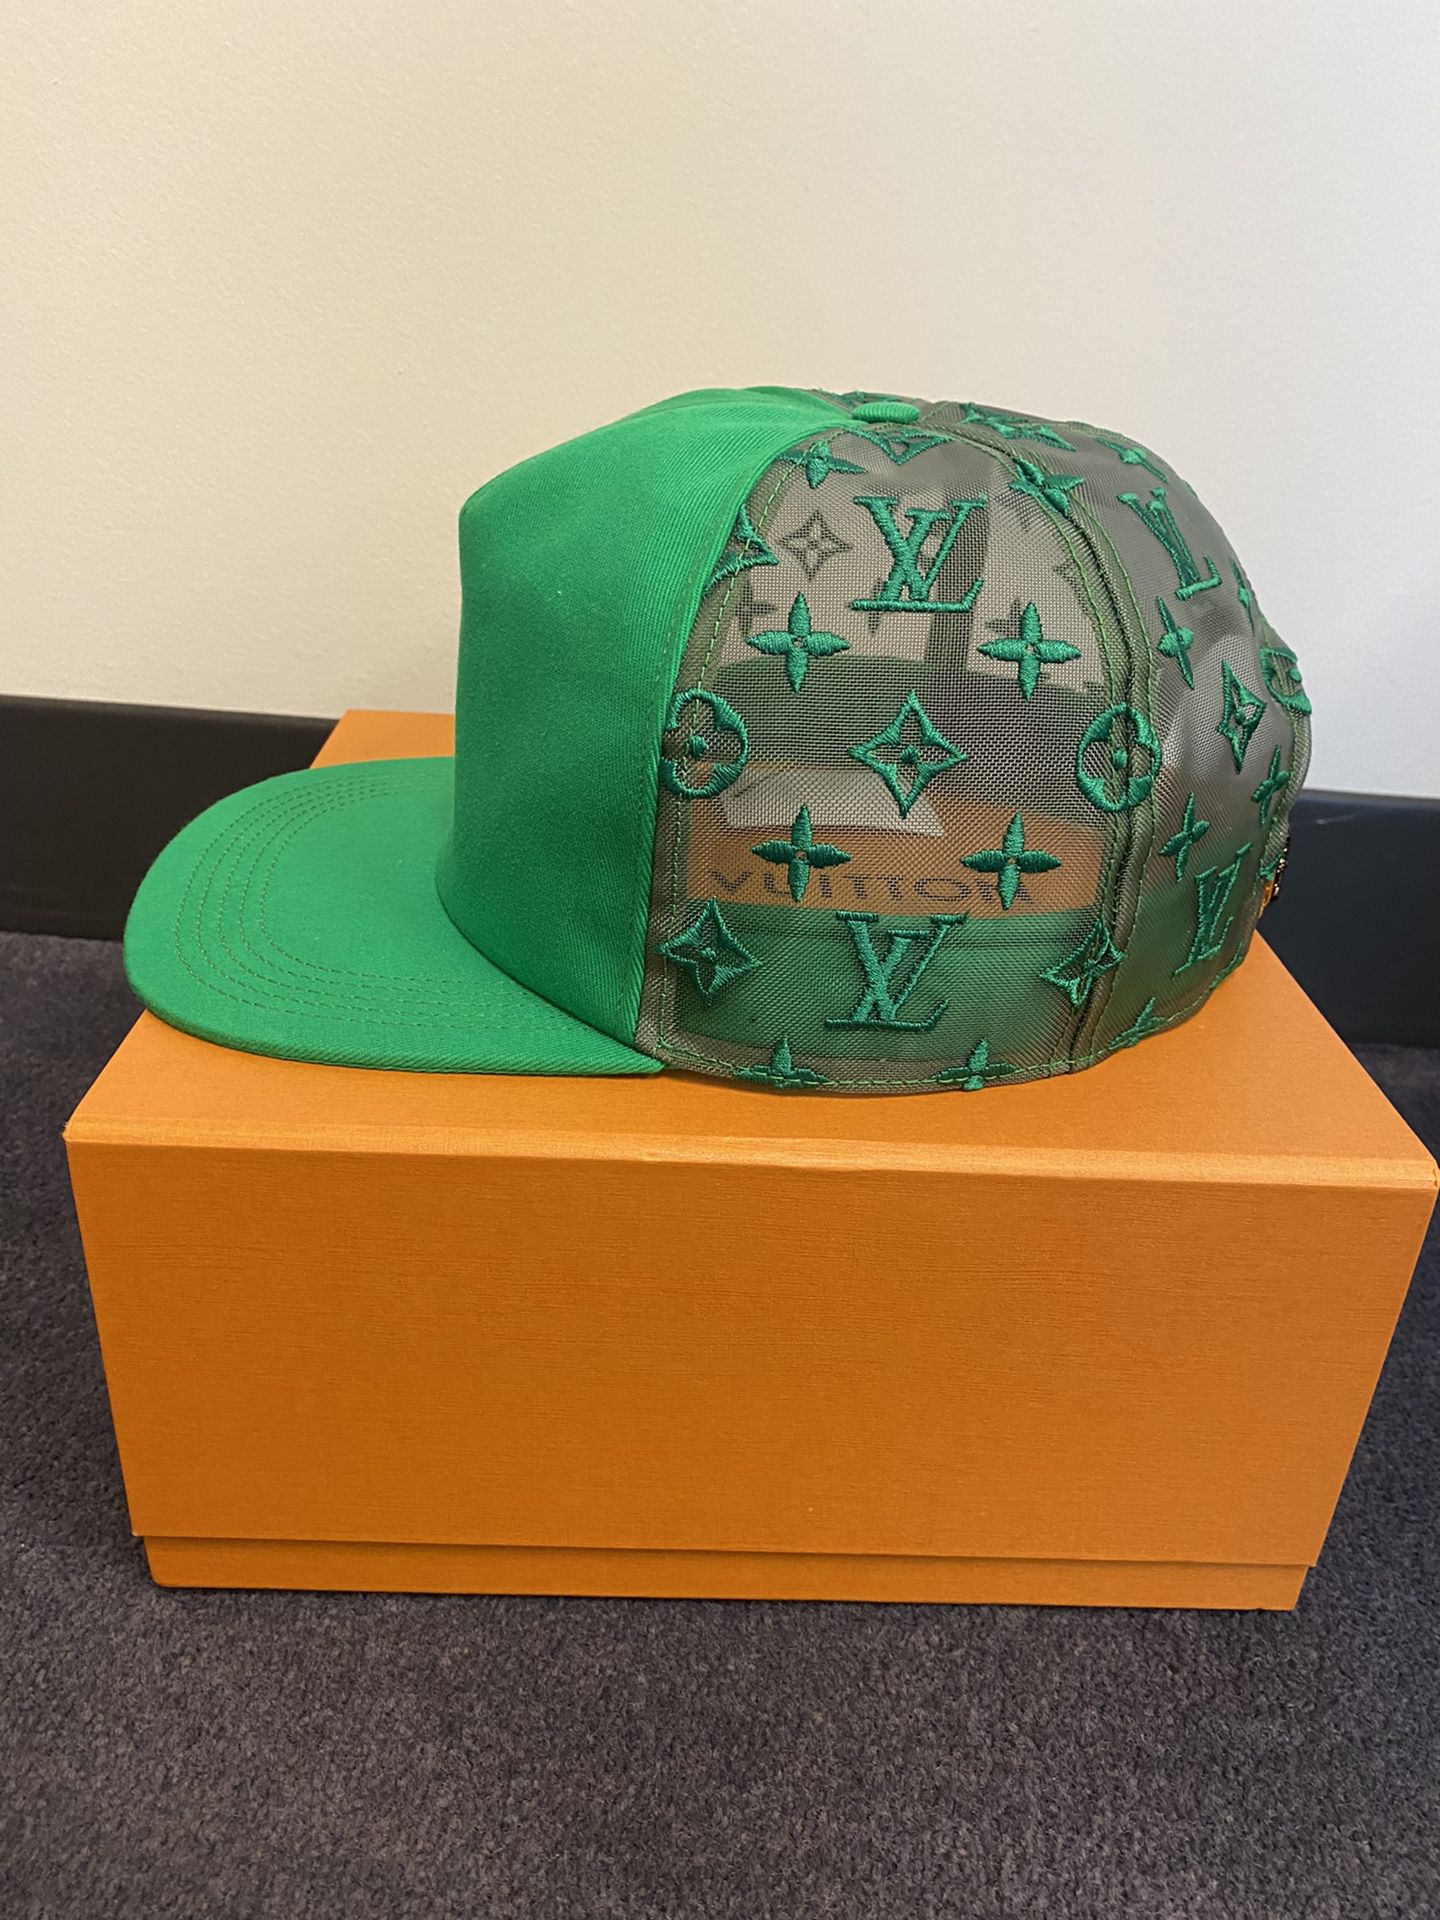 Louis Vuitton “LV Get Ready Cap” (Reduced Price) for Sale in Clovis, CA -  OfferUp